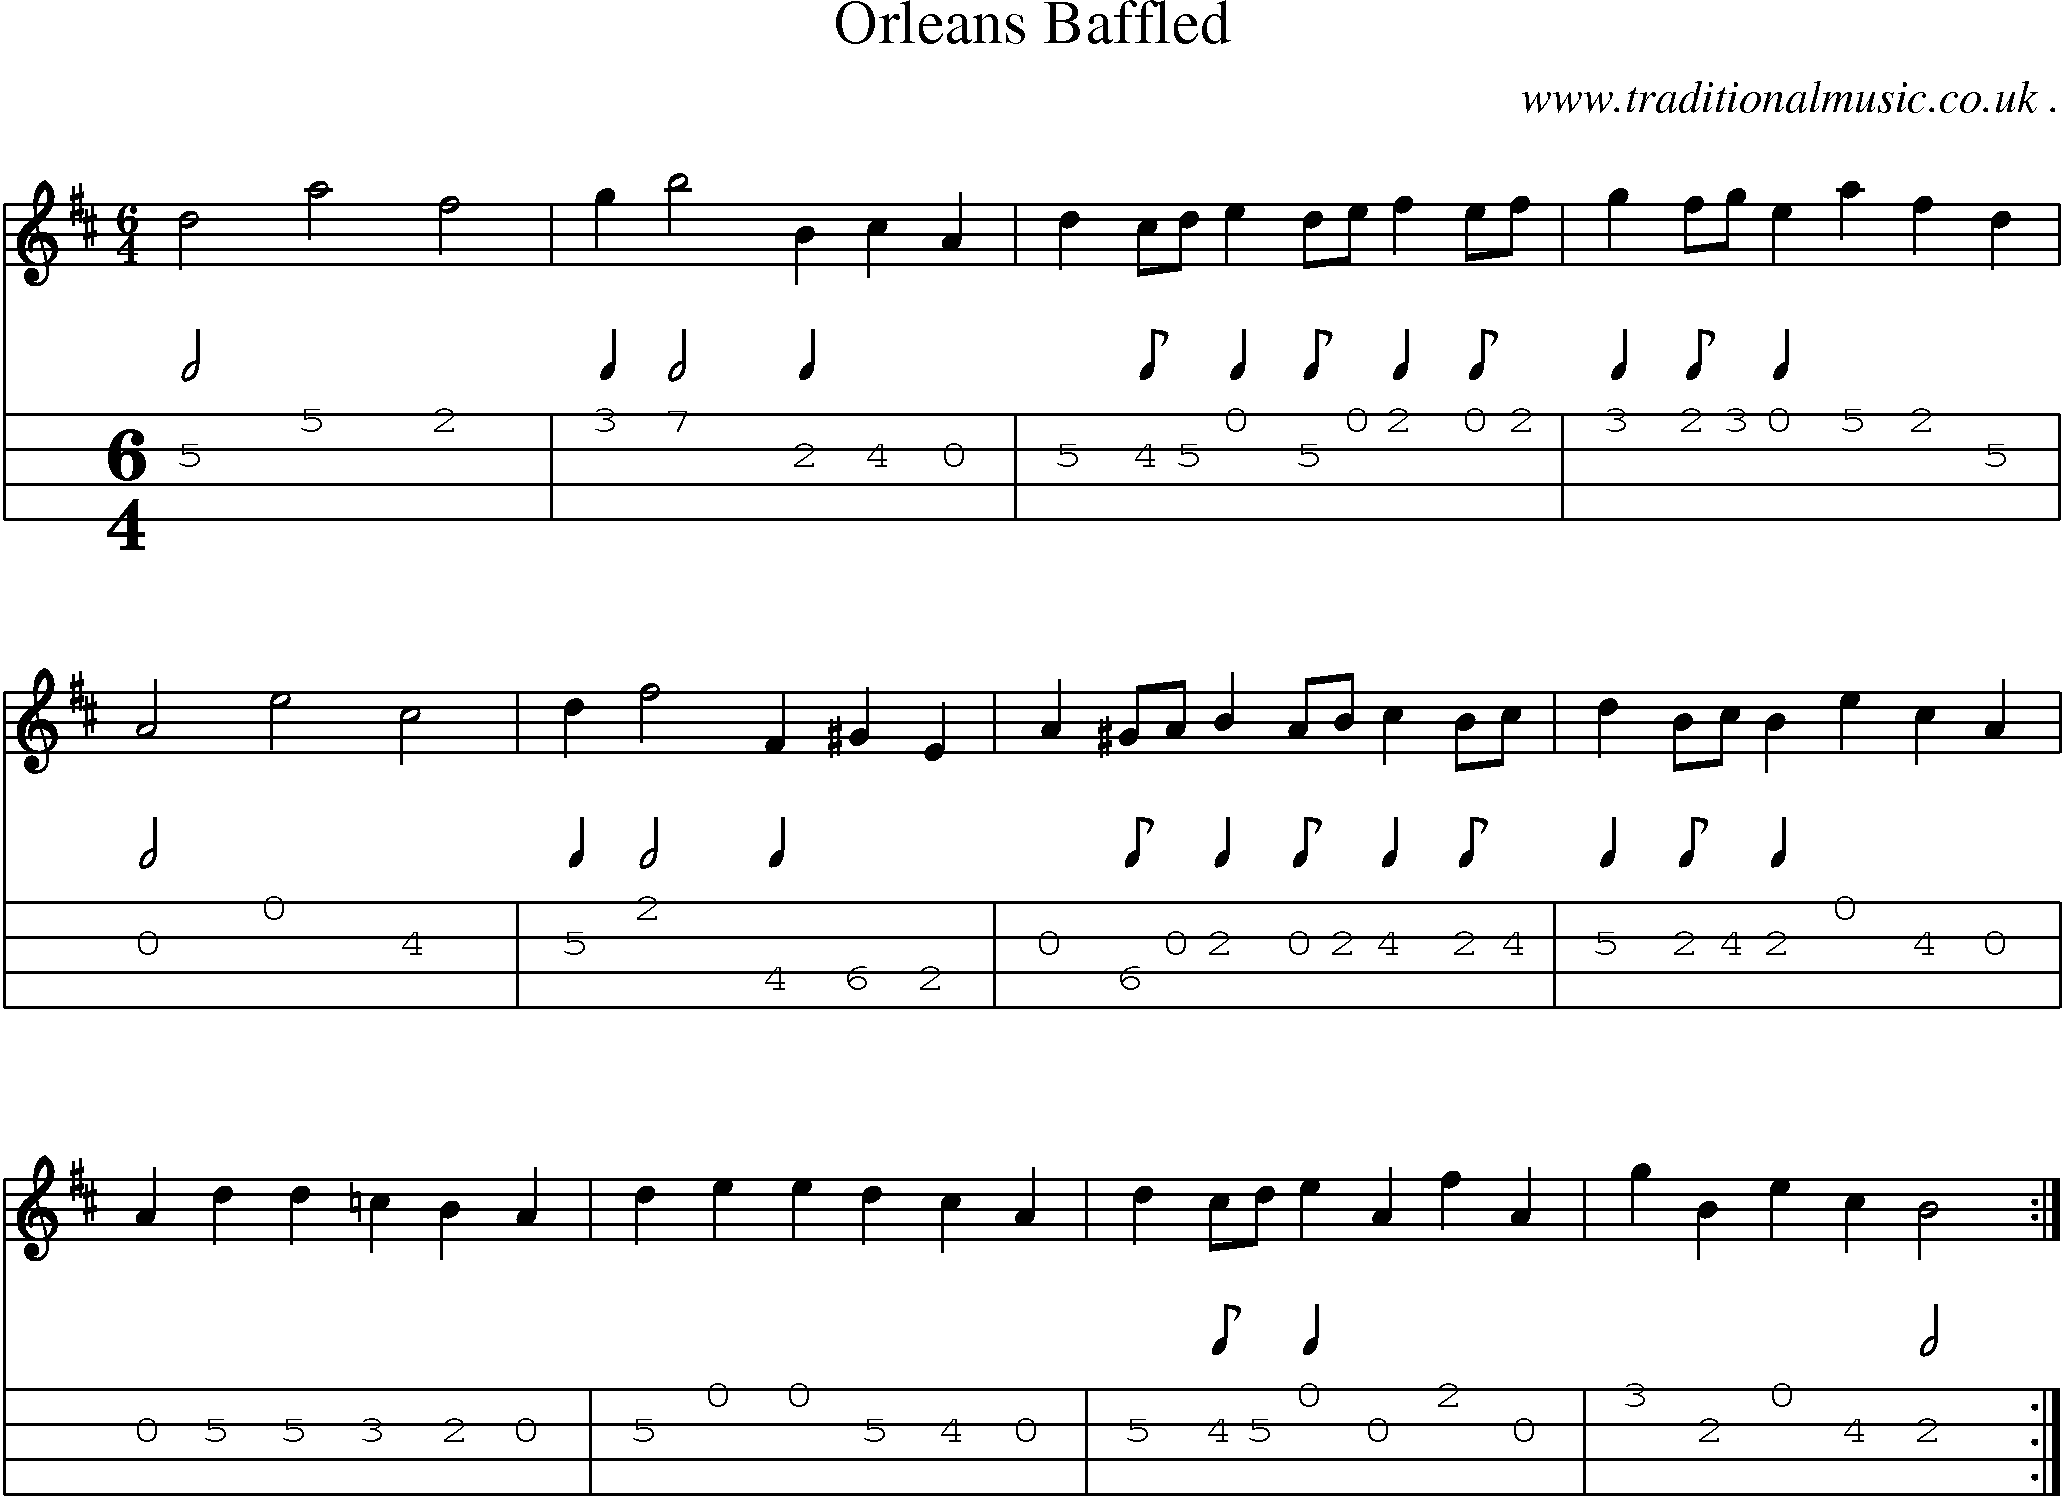 Sheet-Music and Mandolin Tabs for Orleans Baffled